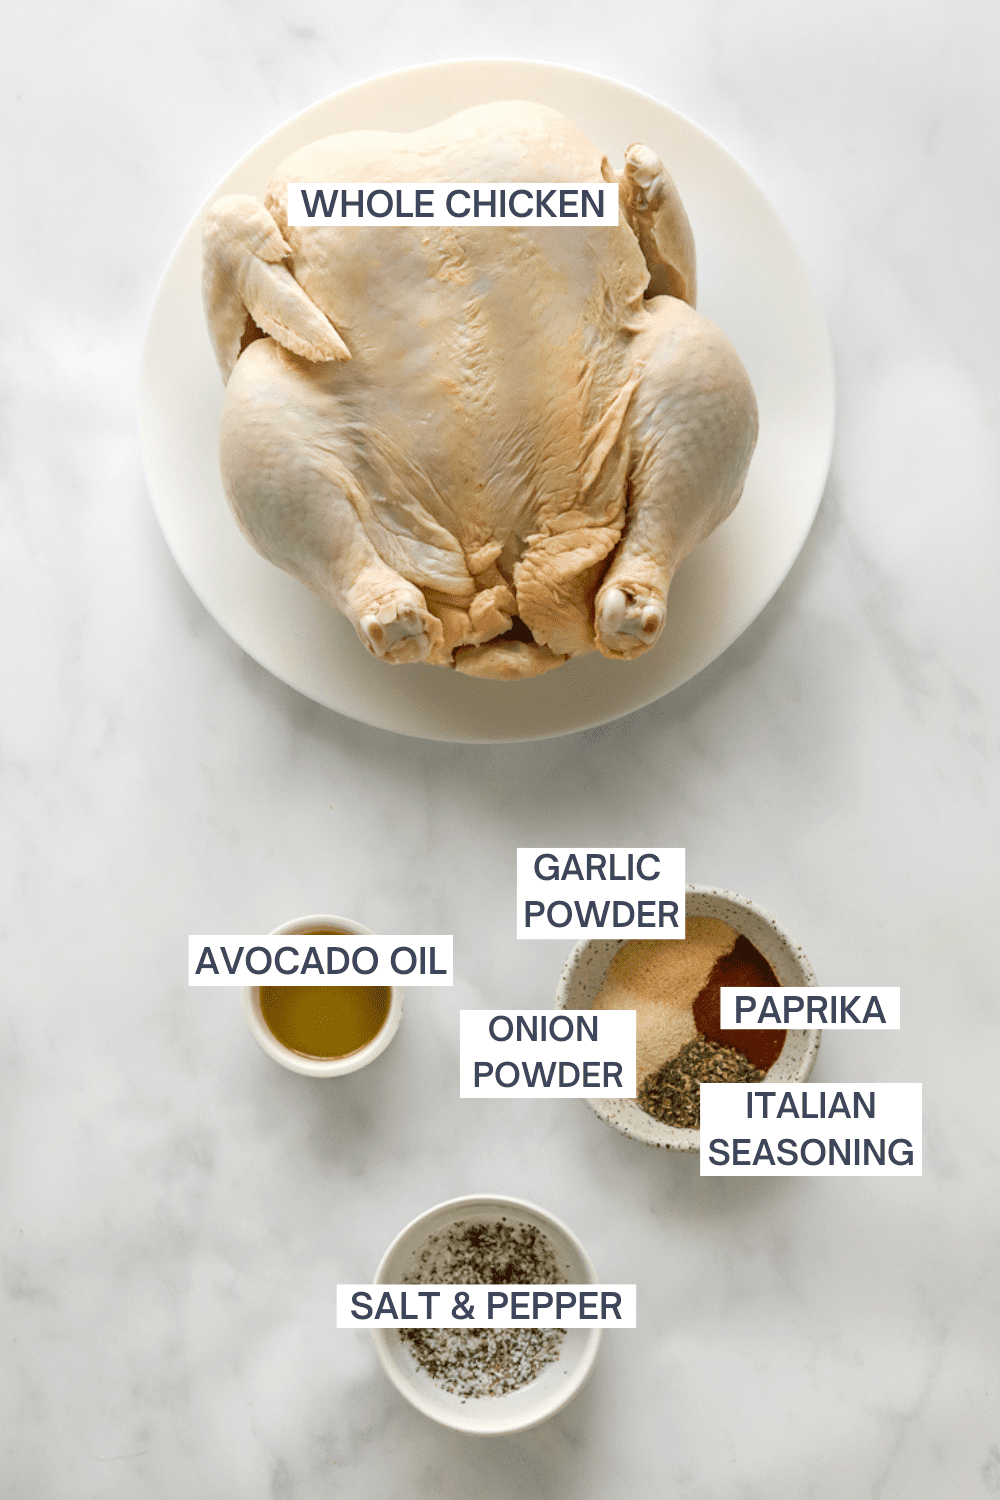 Whole uncooked chicken with a small bowl of oil, a bowl of spices, and a bowl of salt and pepper in front of it. 